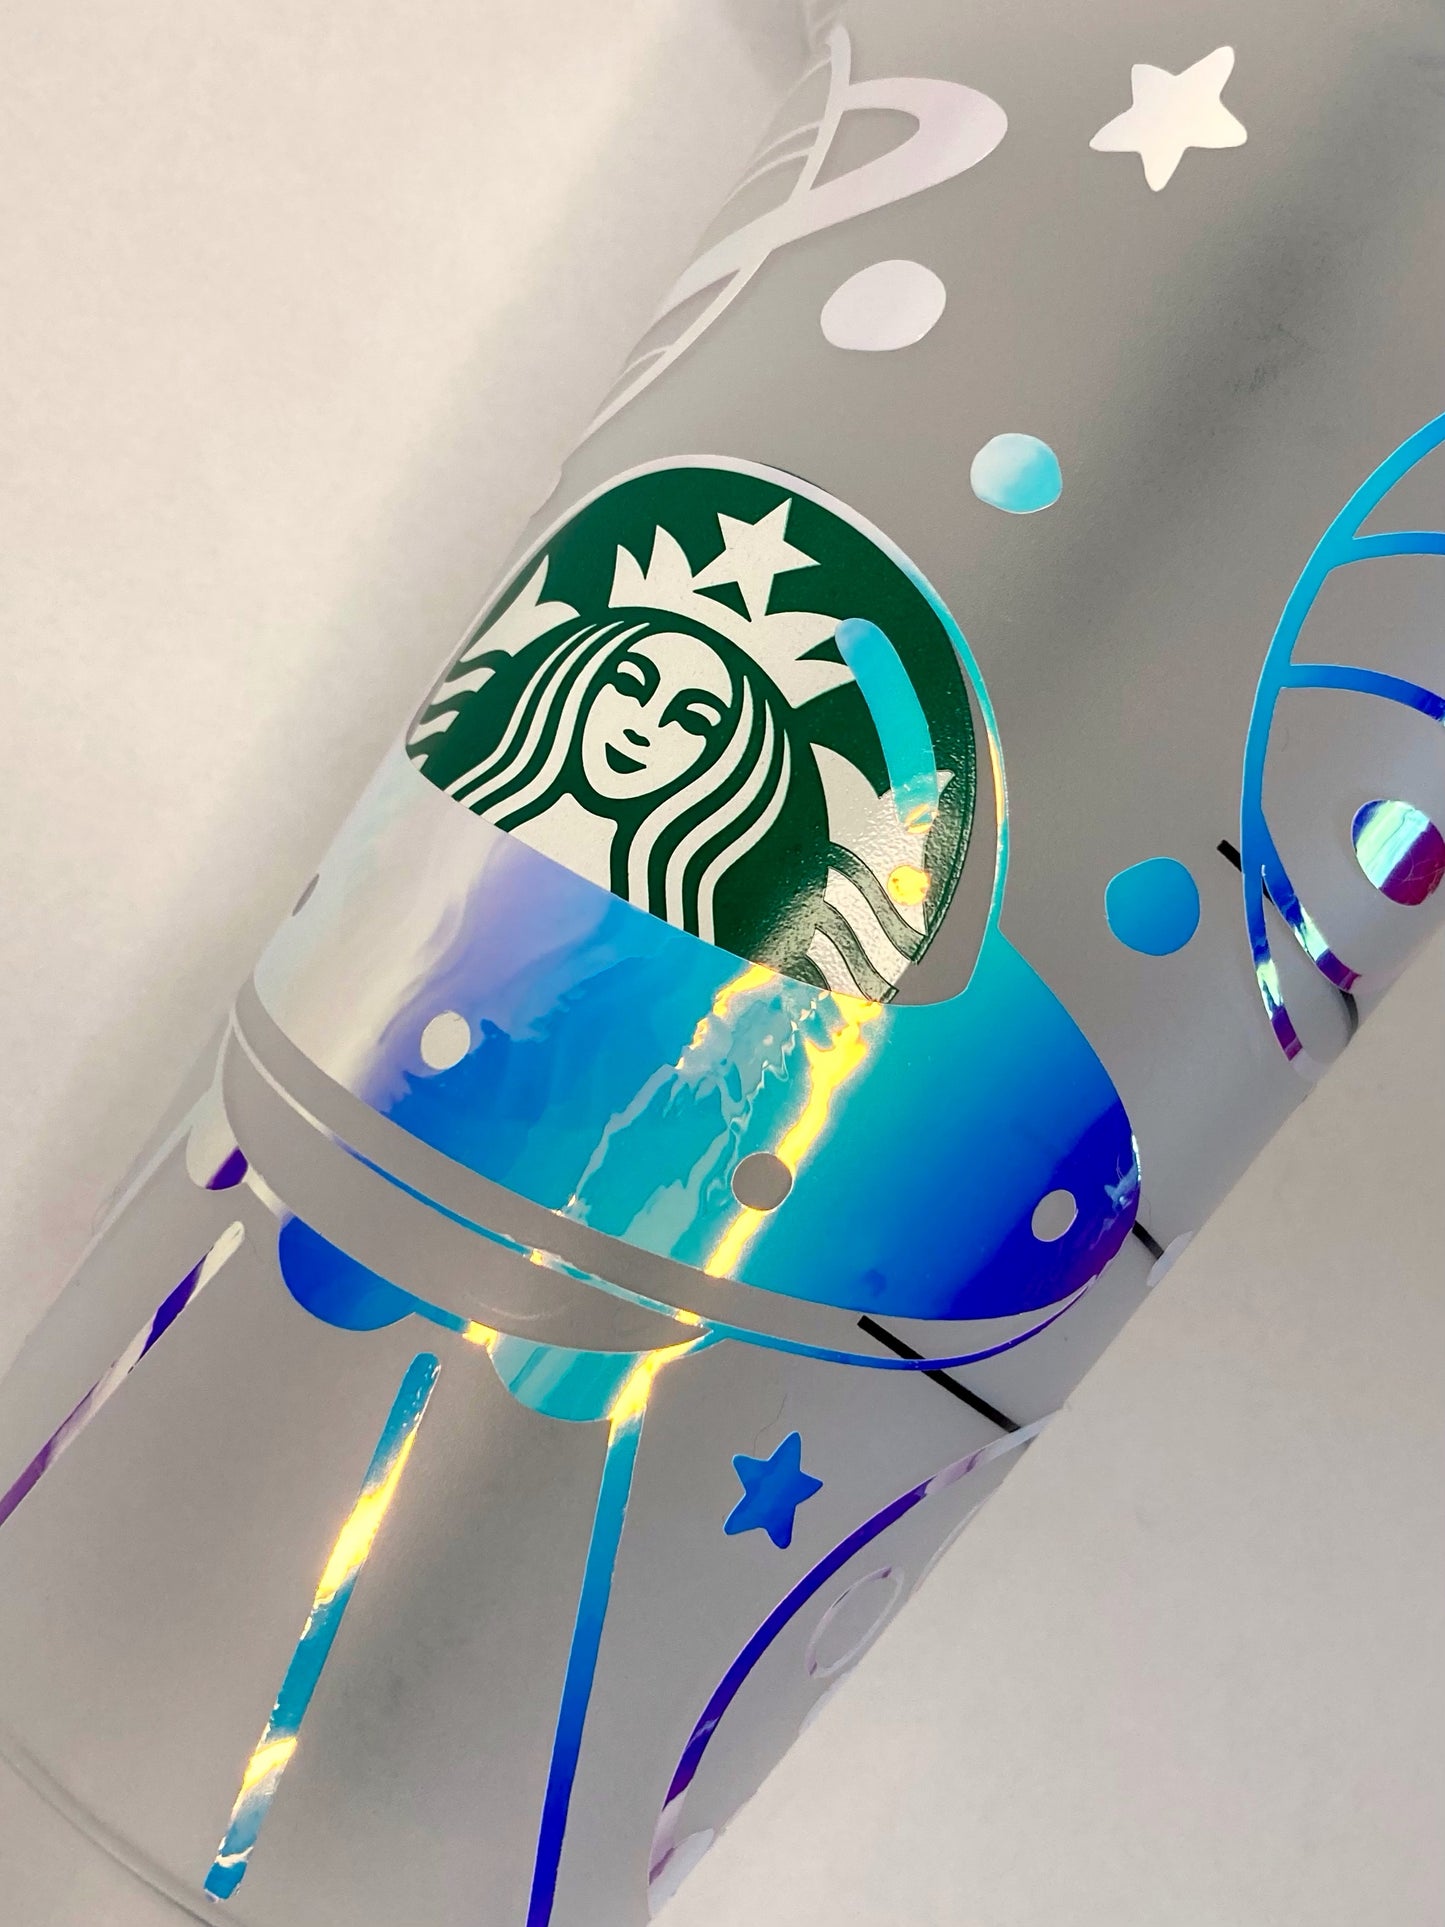 Custom Starbucks inspired reusable cold cup tumbler with straw - holographic space alien design